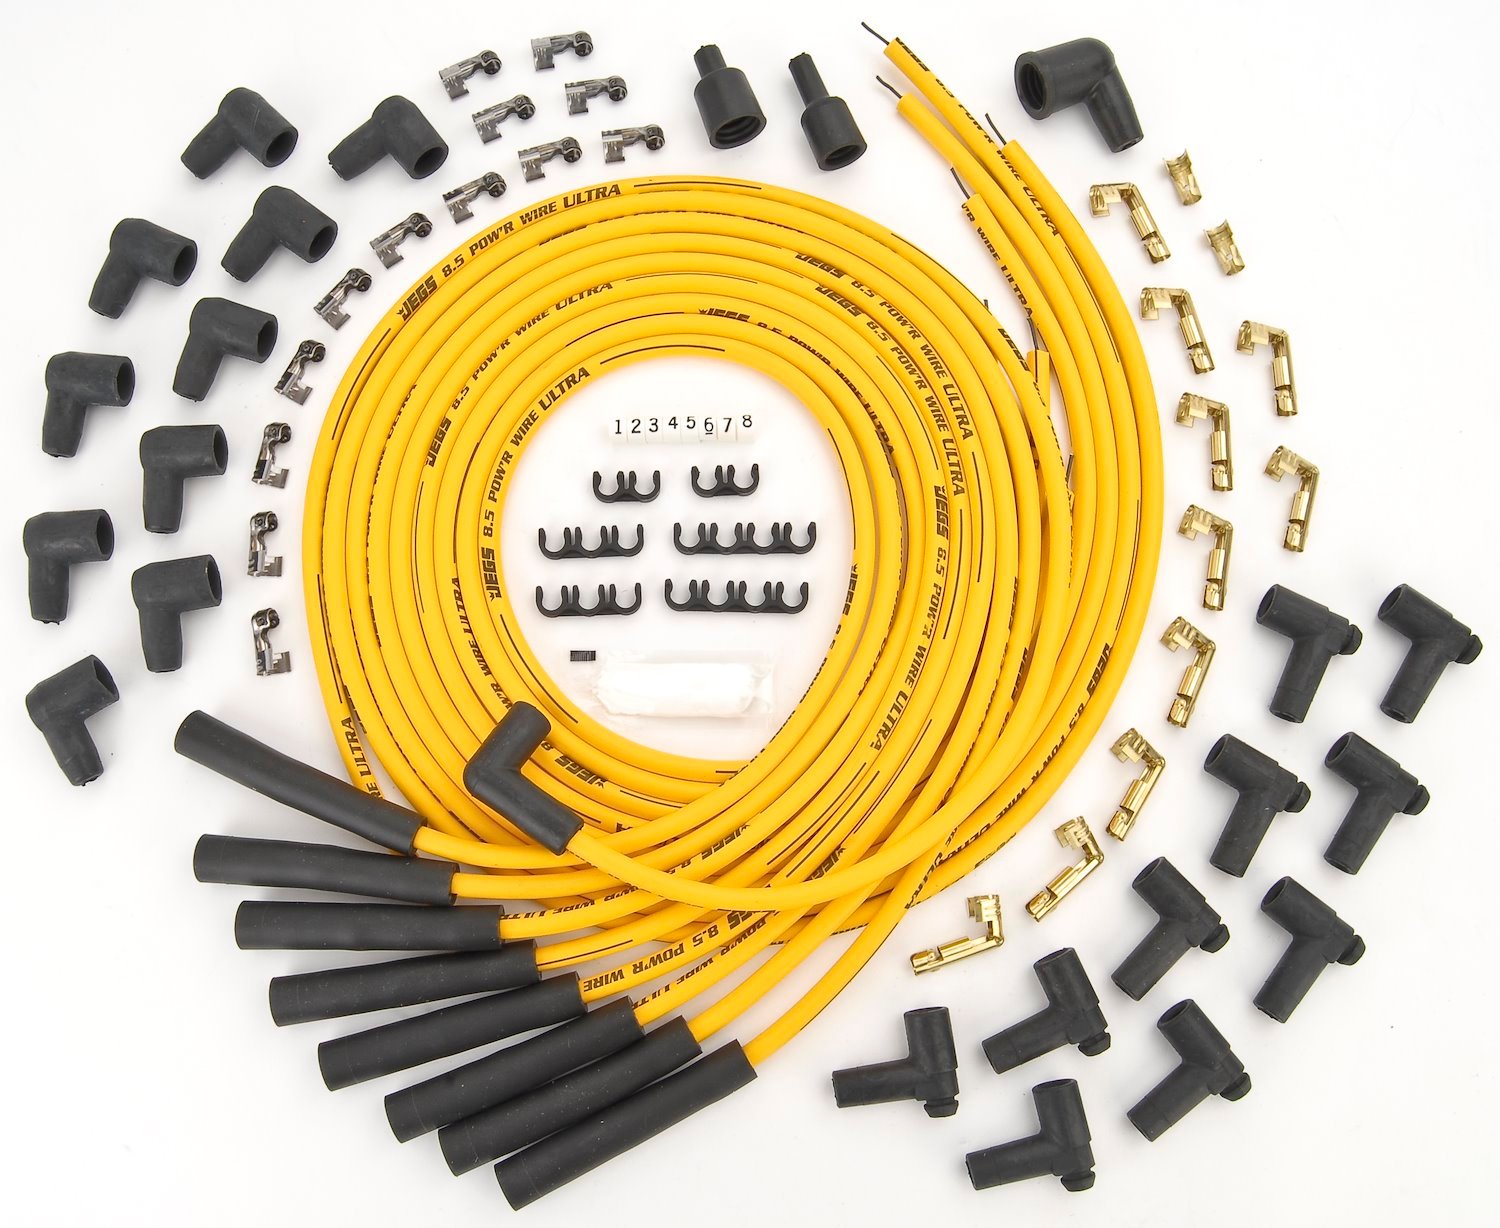 8.5mm Yellow Ultra Pow'r Wires Small & Big Block Chevy Over Valve Covers or Under Headers & AMC 290-401 V8 W/HEI